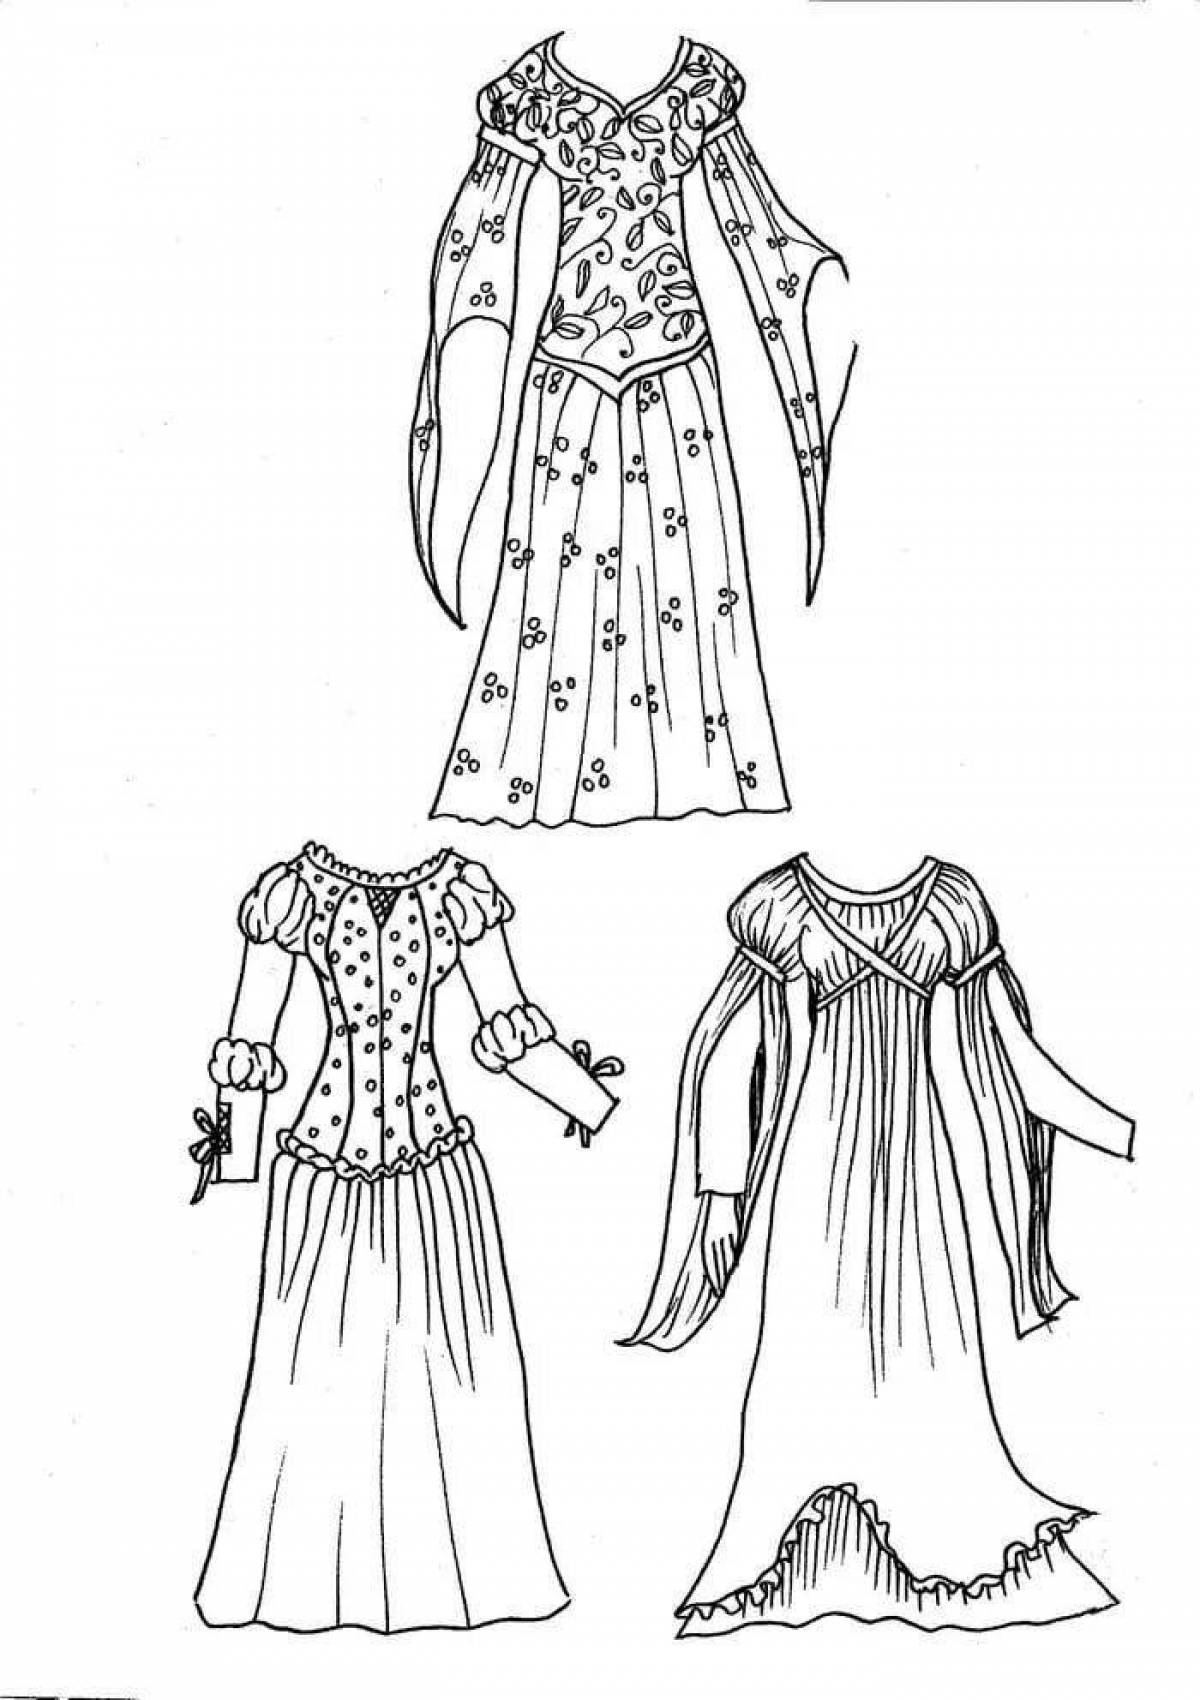 Detailed coloring of theatrical costume